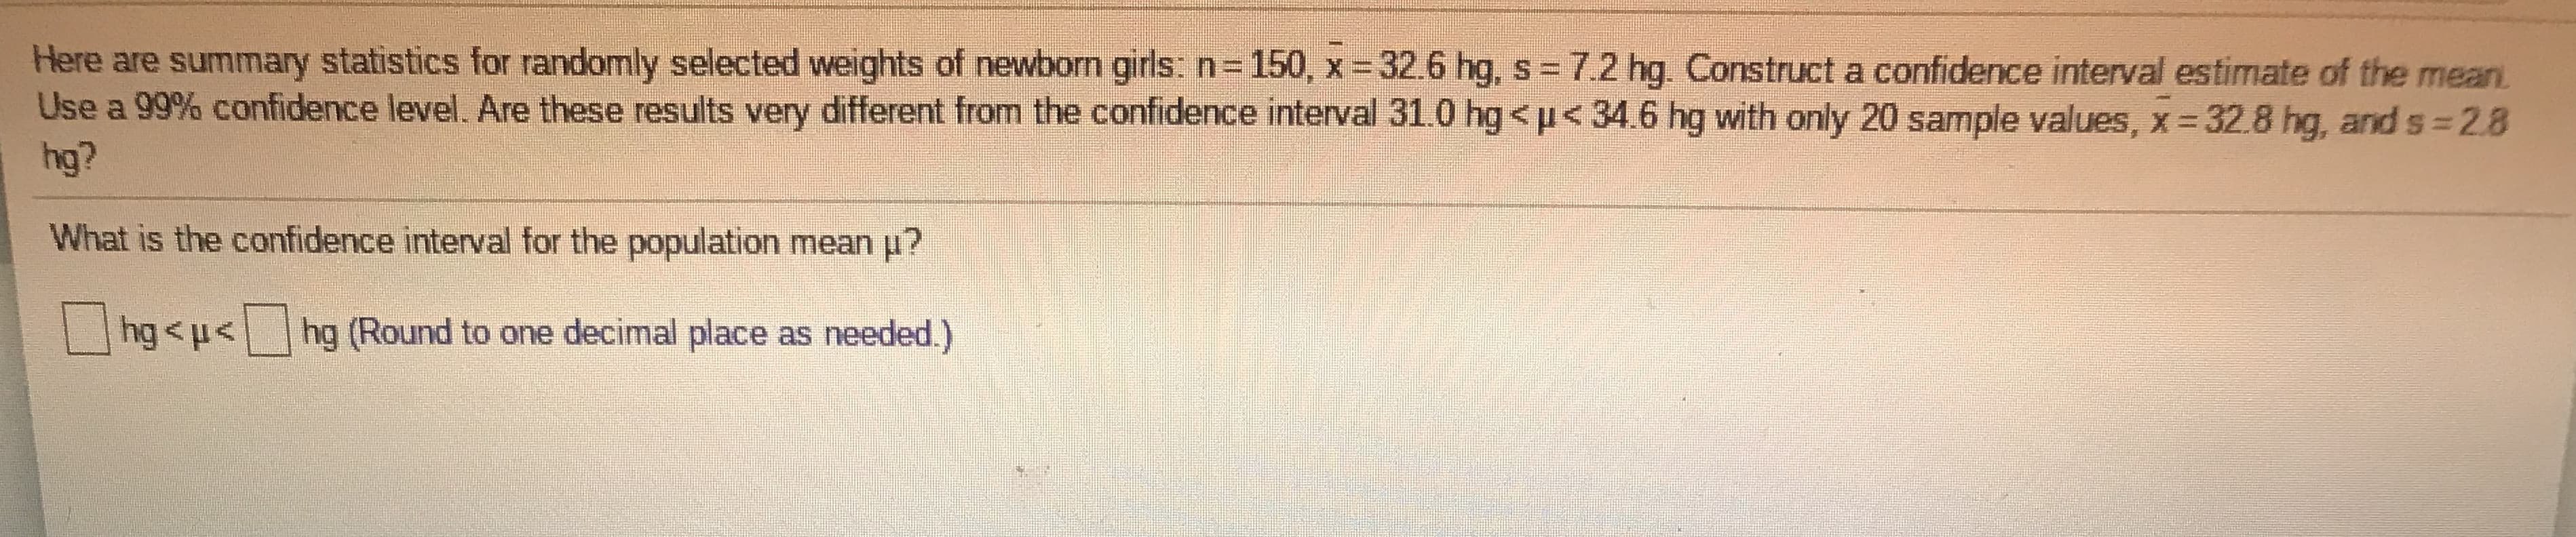 Here are summary statistics for randomly selected weights of newborn girls:n=150, x 32.6 hg, s = 7.2 hg. Construct a confidence interval estimate of the mean.
Use a 99% confidence level. Are these results very different from the confidence interval 31.0 hg<p<34.6 hg with only 20 sample values, x 32.8 hg, and s 2.8
hg?
What is the confidence interval for the population mean p?
hg<u<hg (Round to one decimal place as needed.)
